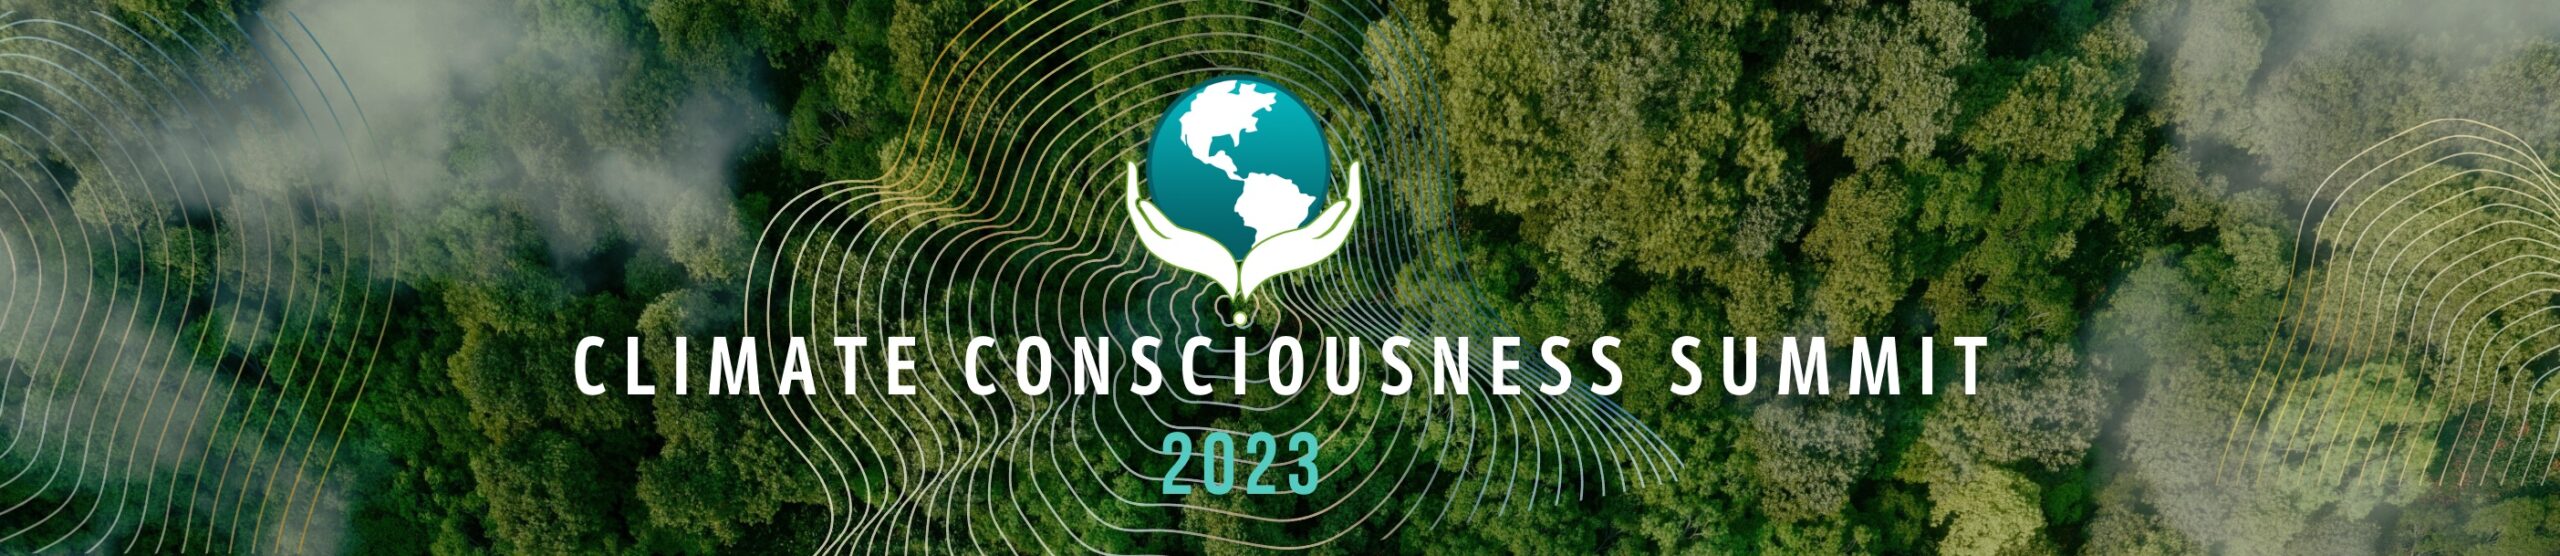 Climate Consciousness Summit - Webpage - 4